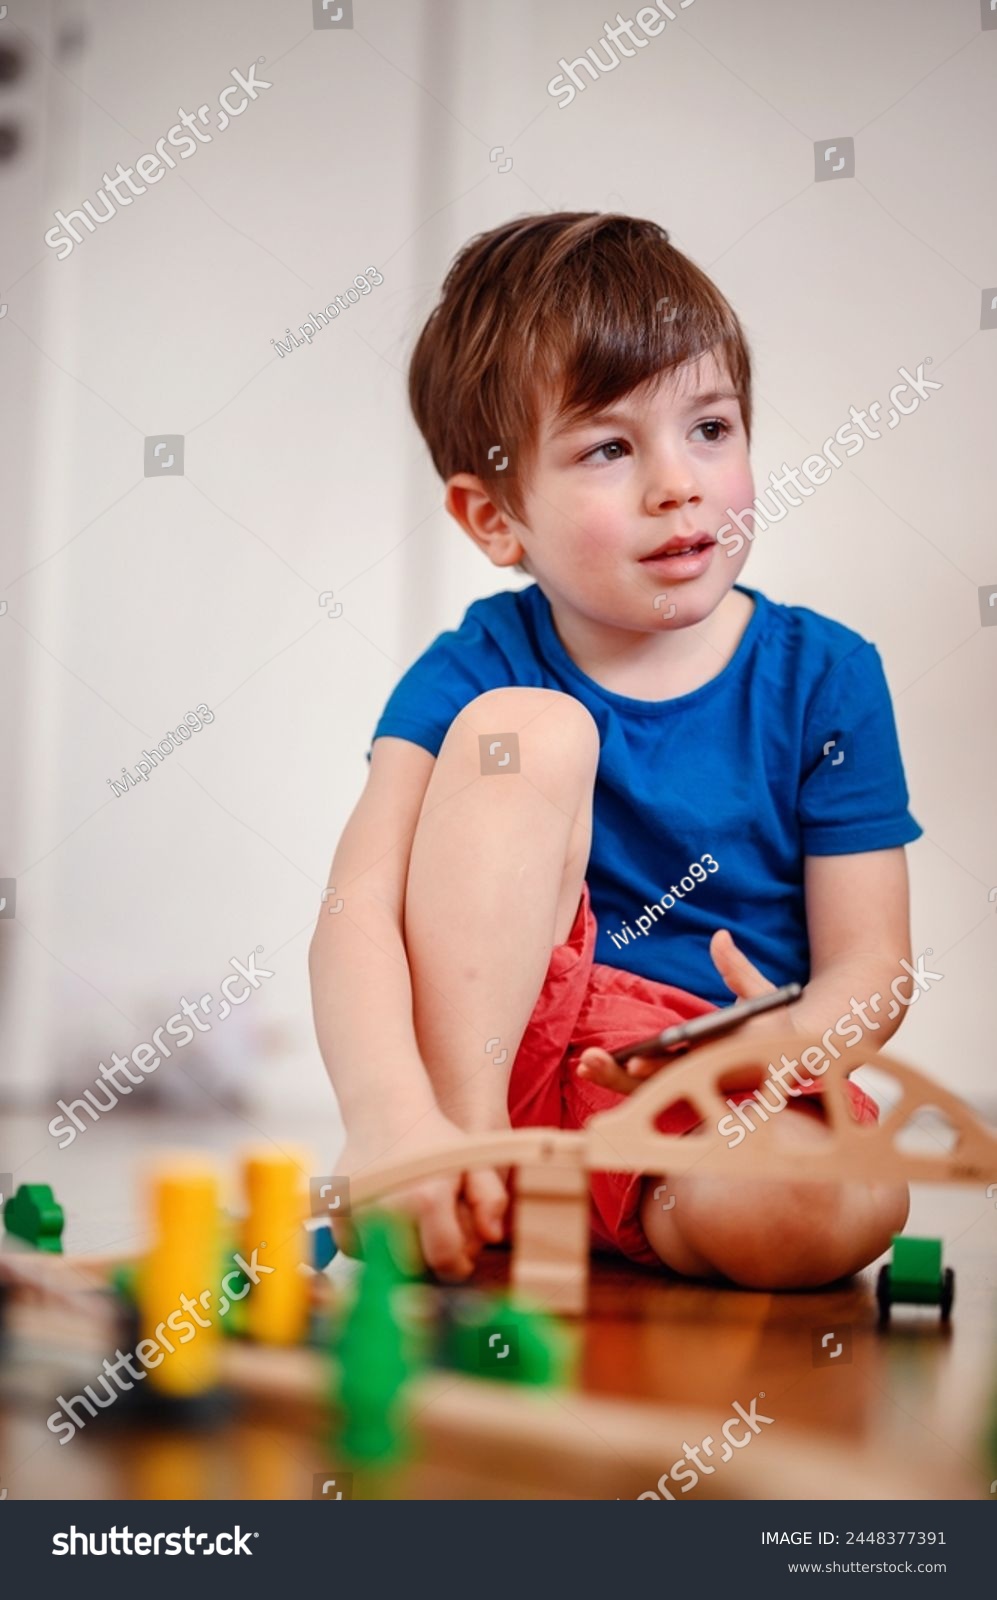 A joyful young boy with a smartphone sits amidst a wooden train setup, his bright laughter echoing the playful fusion of digital and tangible play #2448377391